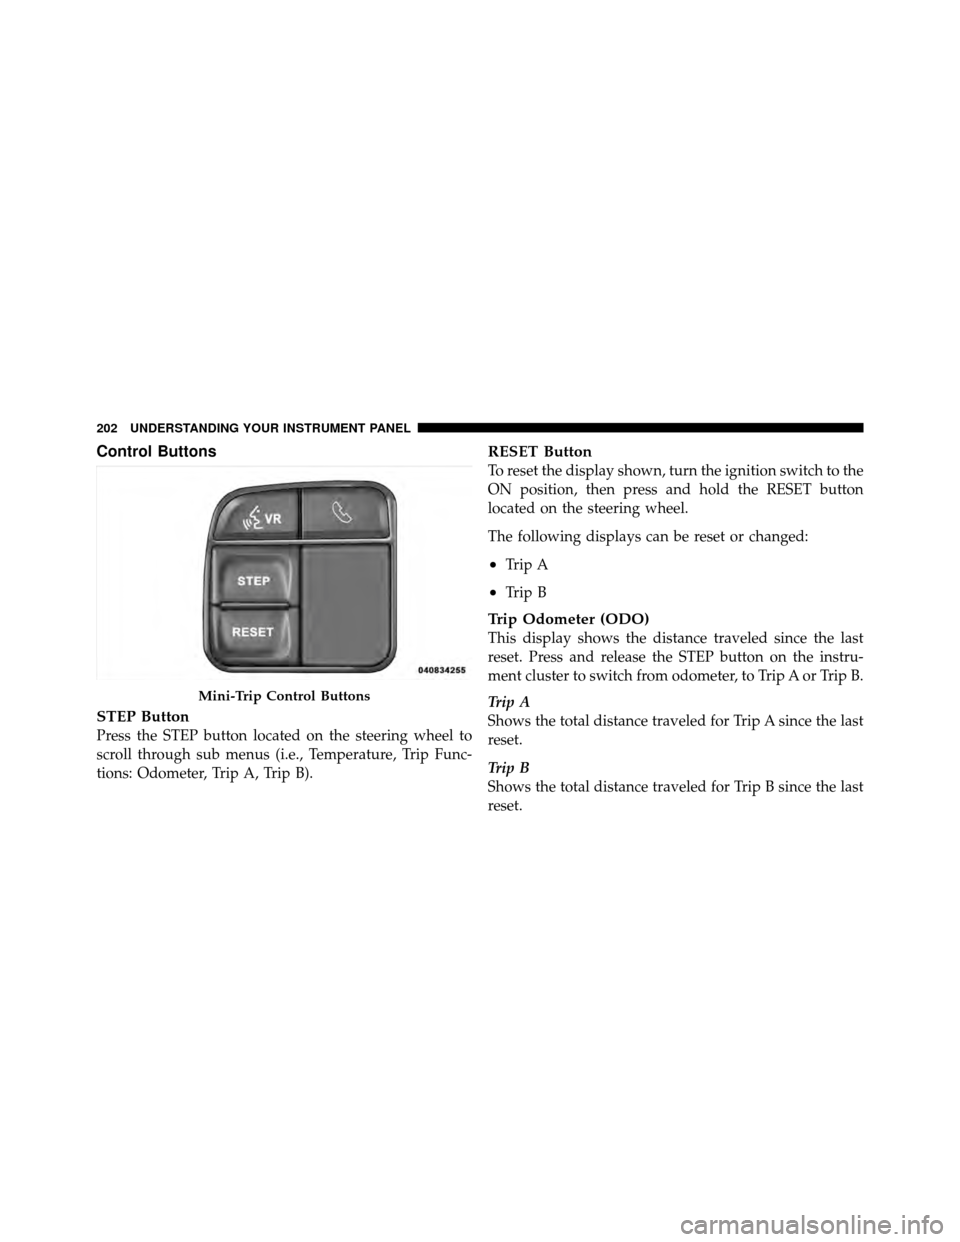 CHRYSLER 200 2011 1.G Owners Manual Control Buttons
STEP Button
Press the STEP button located on the steering wheel to
scroll through sub menus (i.e., Temperature, Trip Func-
tions: Odometer, Trip A, Trip B).
RESET Button
To reset the d